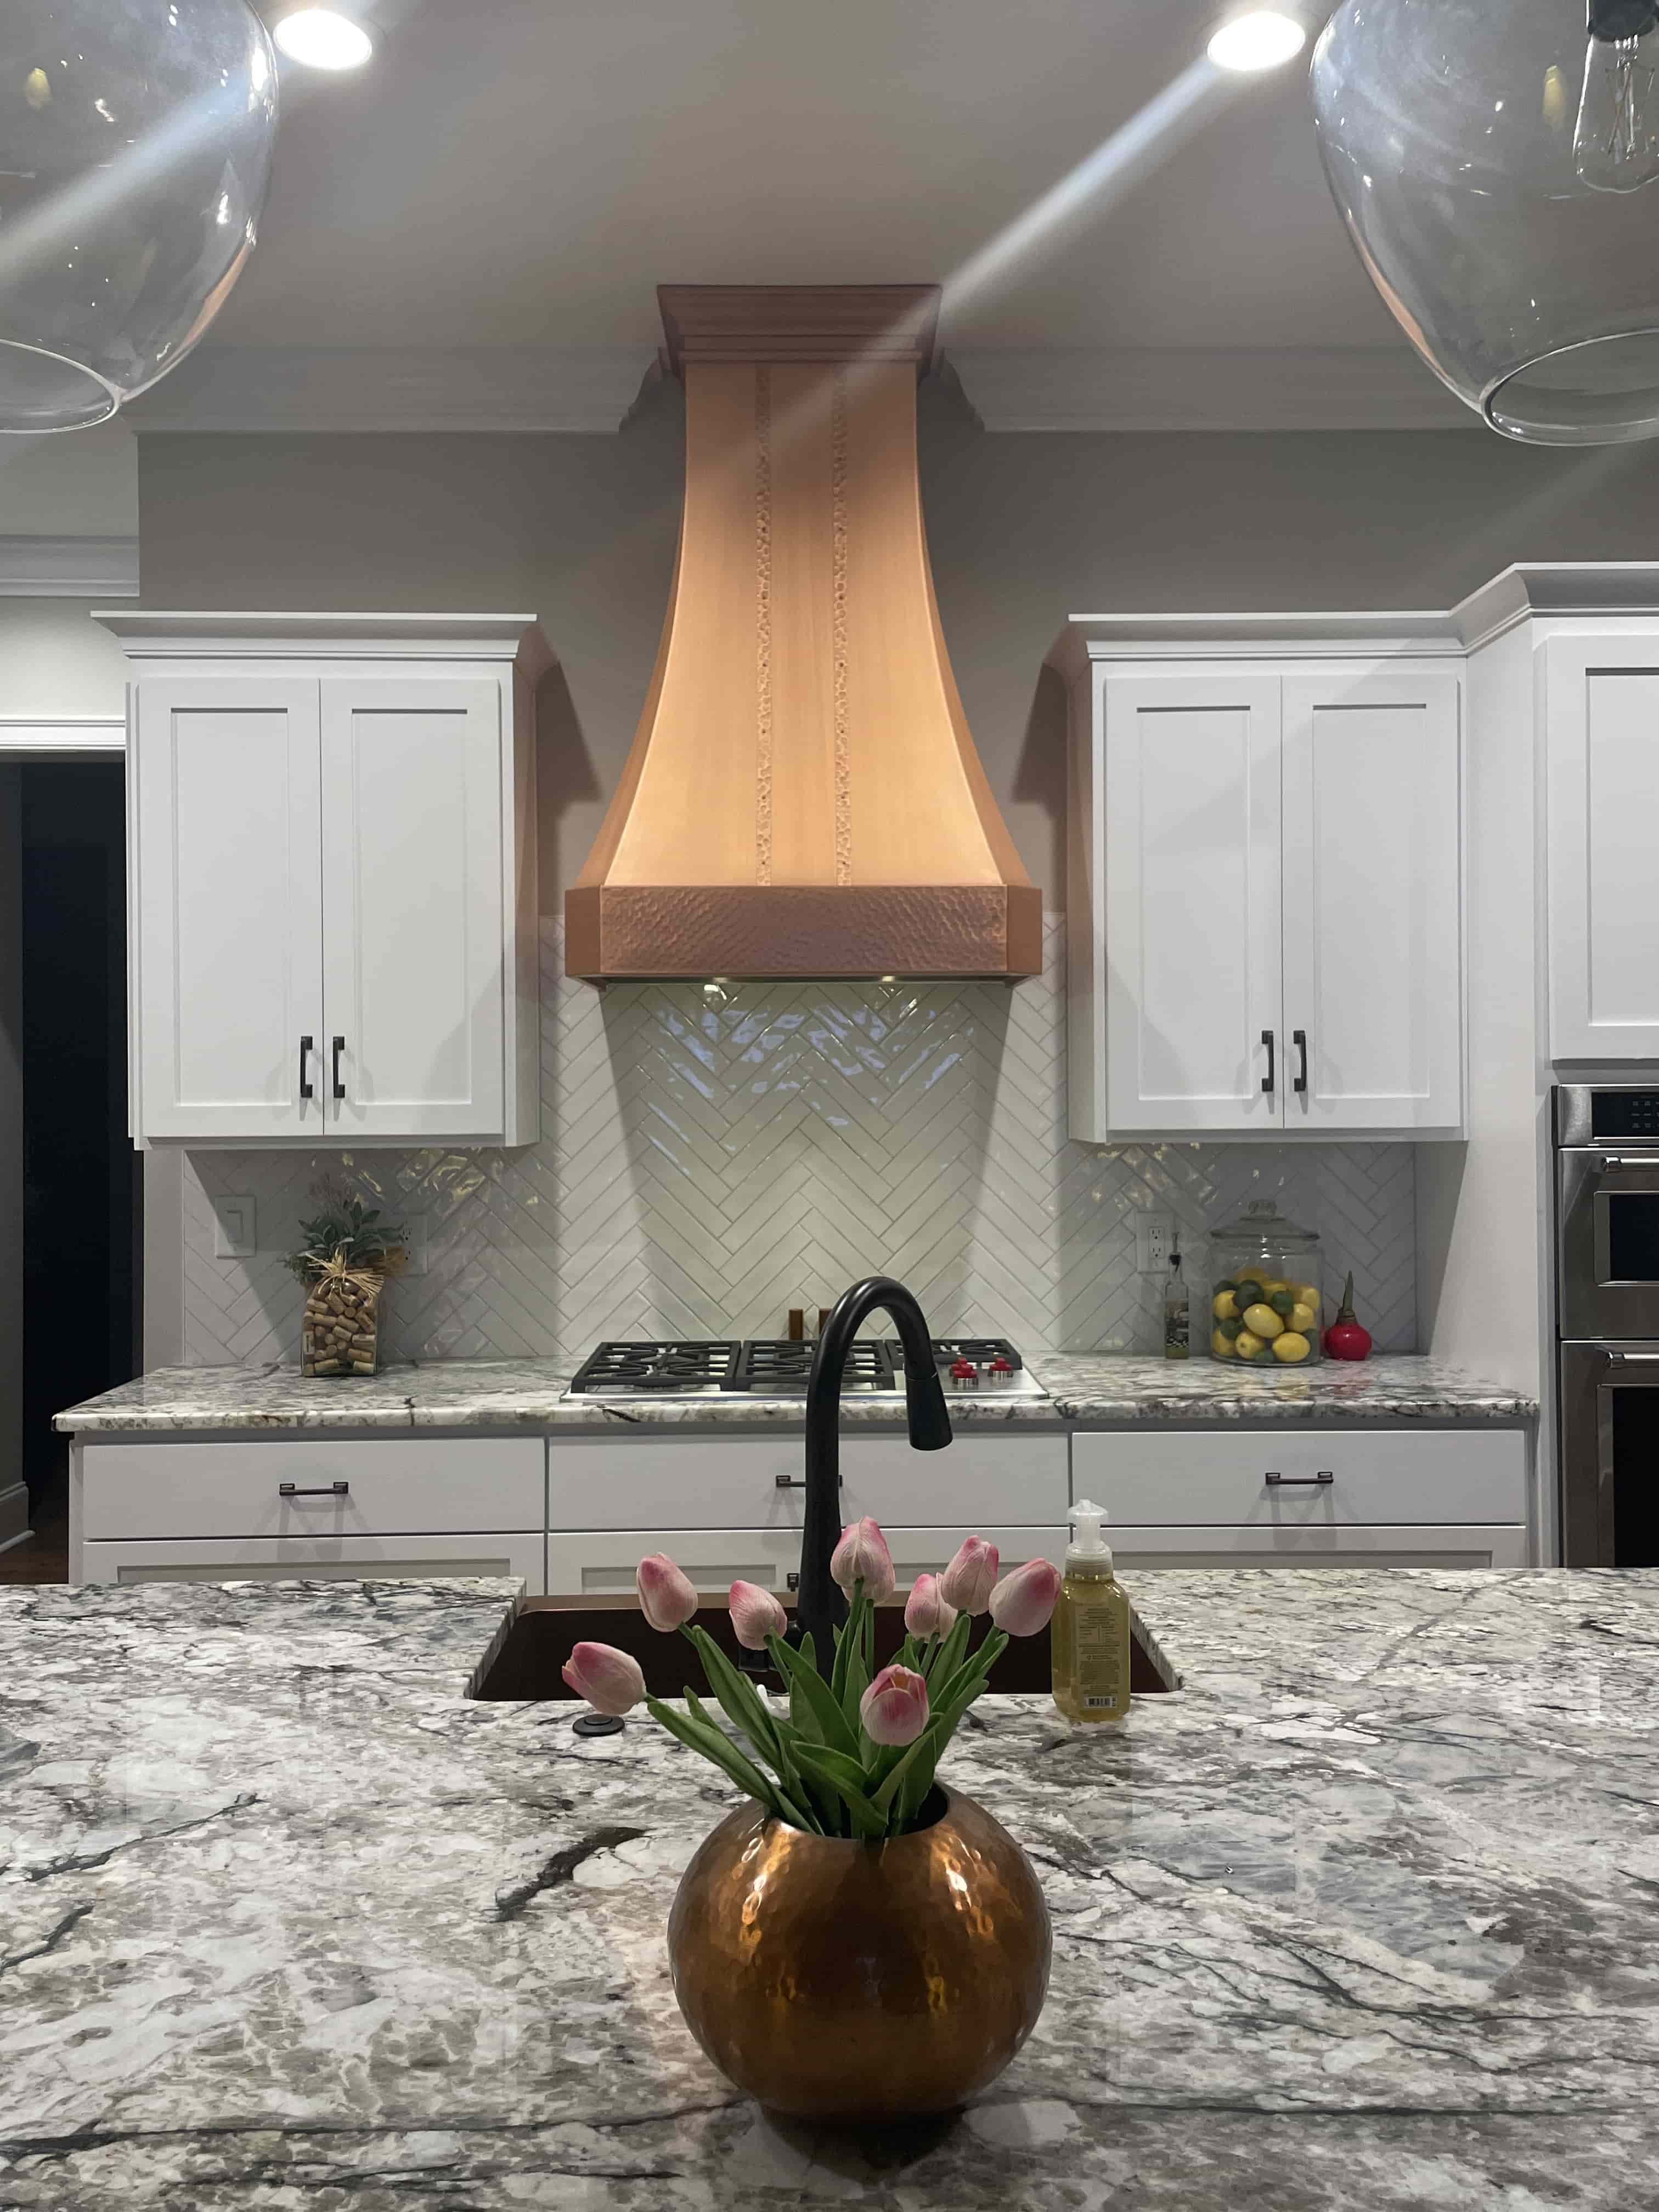 CopperSmith Classic CX5 Wall Mount Old Coin Copper Smooth with Straps and Rivets in a contemporary kitchen with marble countertops white cabinets and white tile backsplash